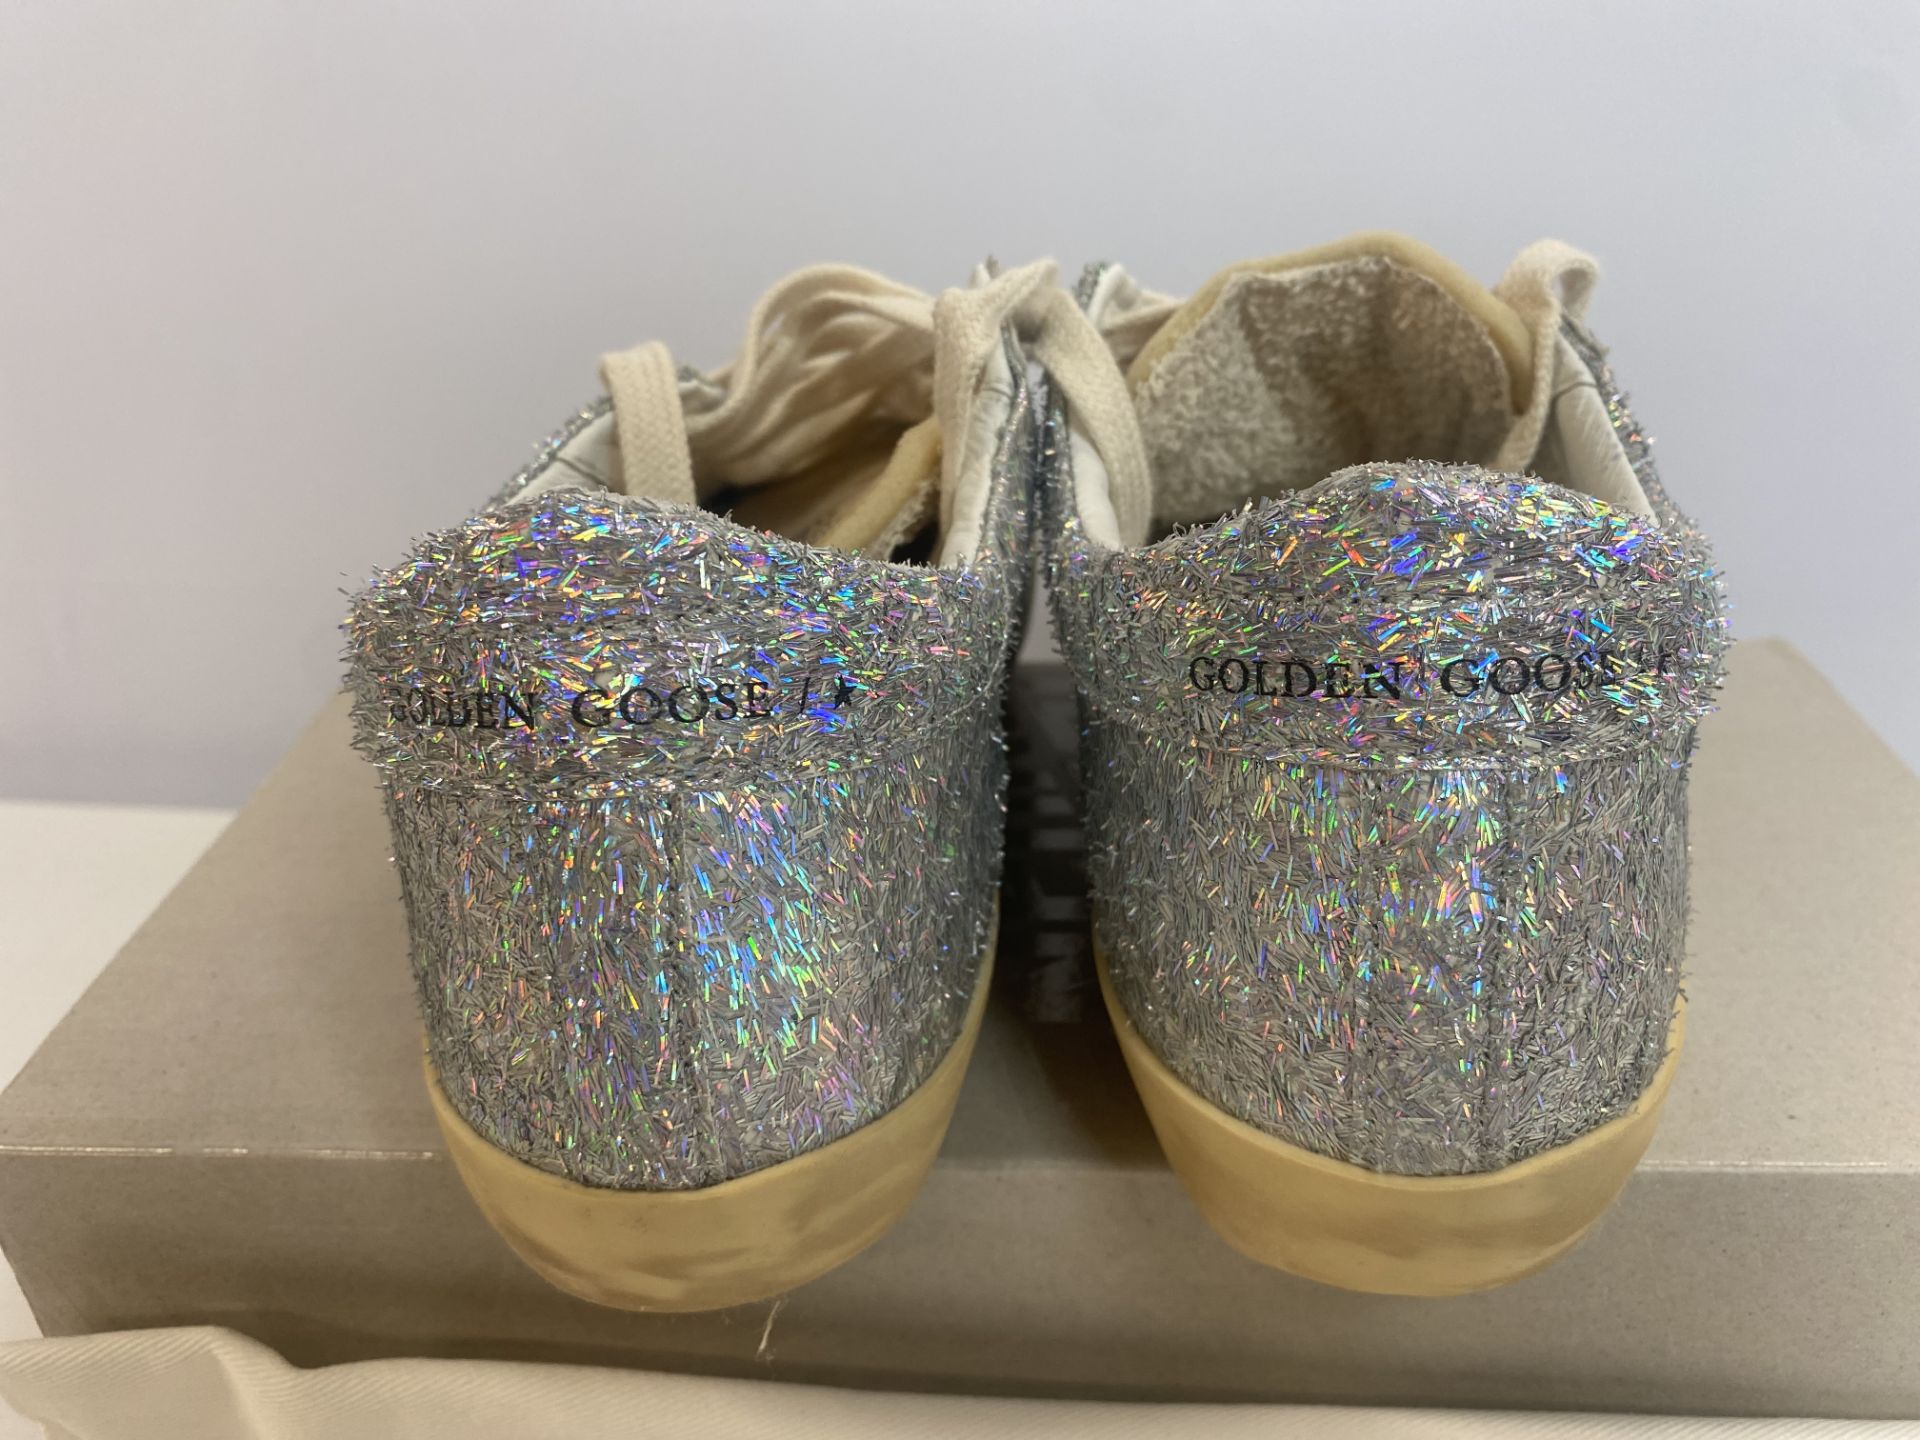 Golden Goose SNKR SUPERSTAR Super Star Classic with list, Size: 36, Color: Silver, Retail Price: $ - Image 5 of 5